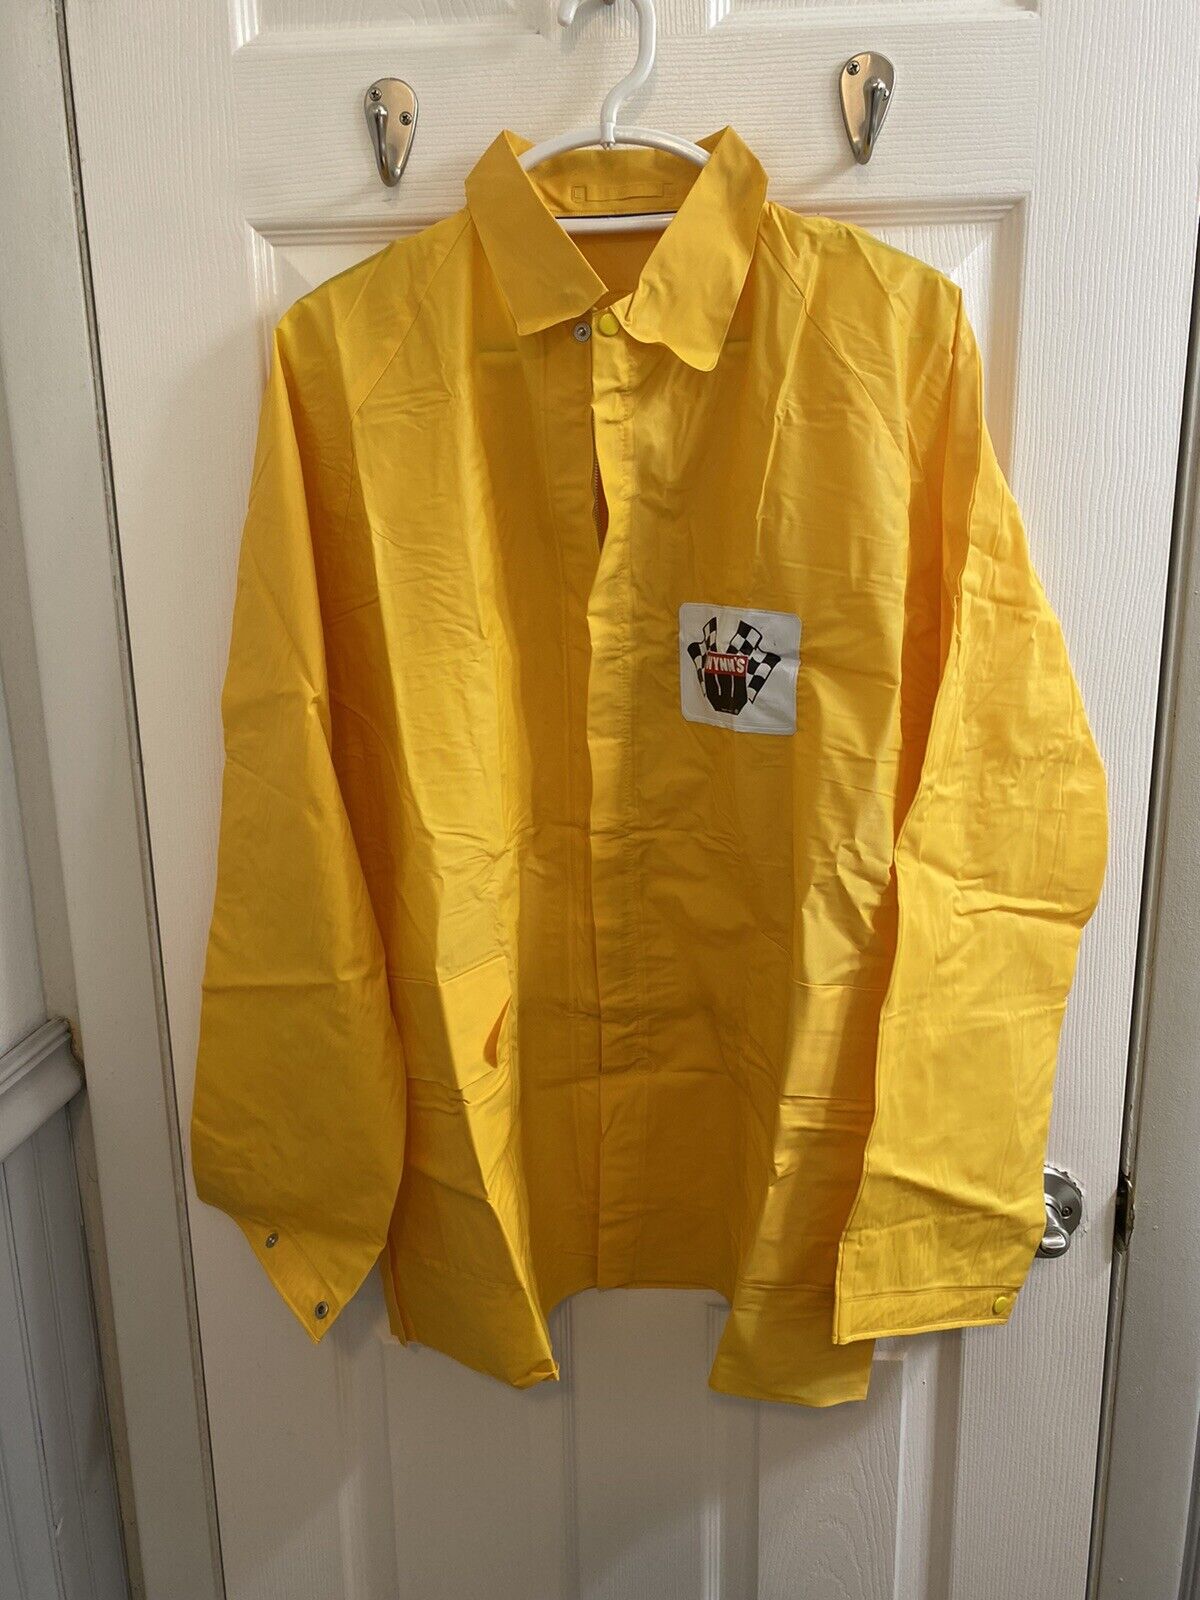 Vintage Wynns Friction Proofing Rain Jacket W/ Carrying Pouch:  Size Large Bx11